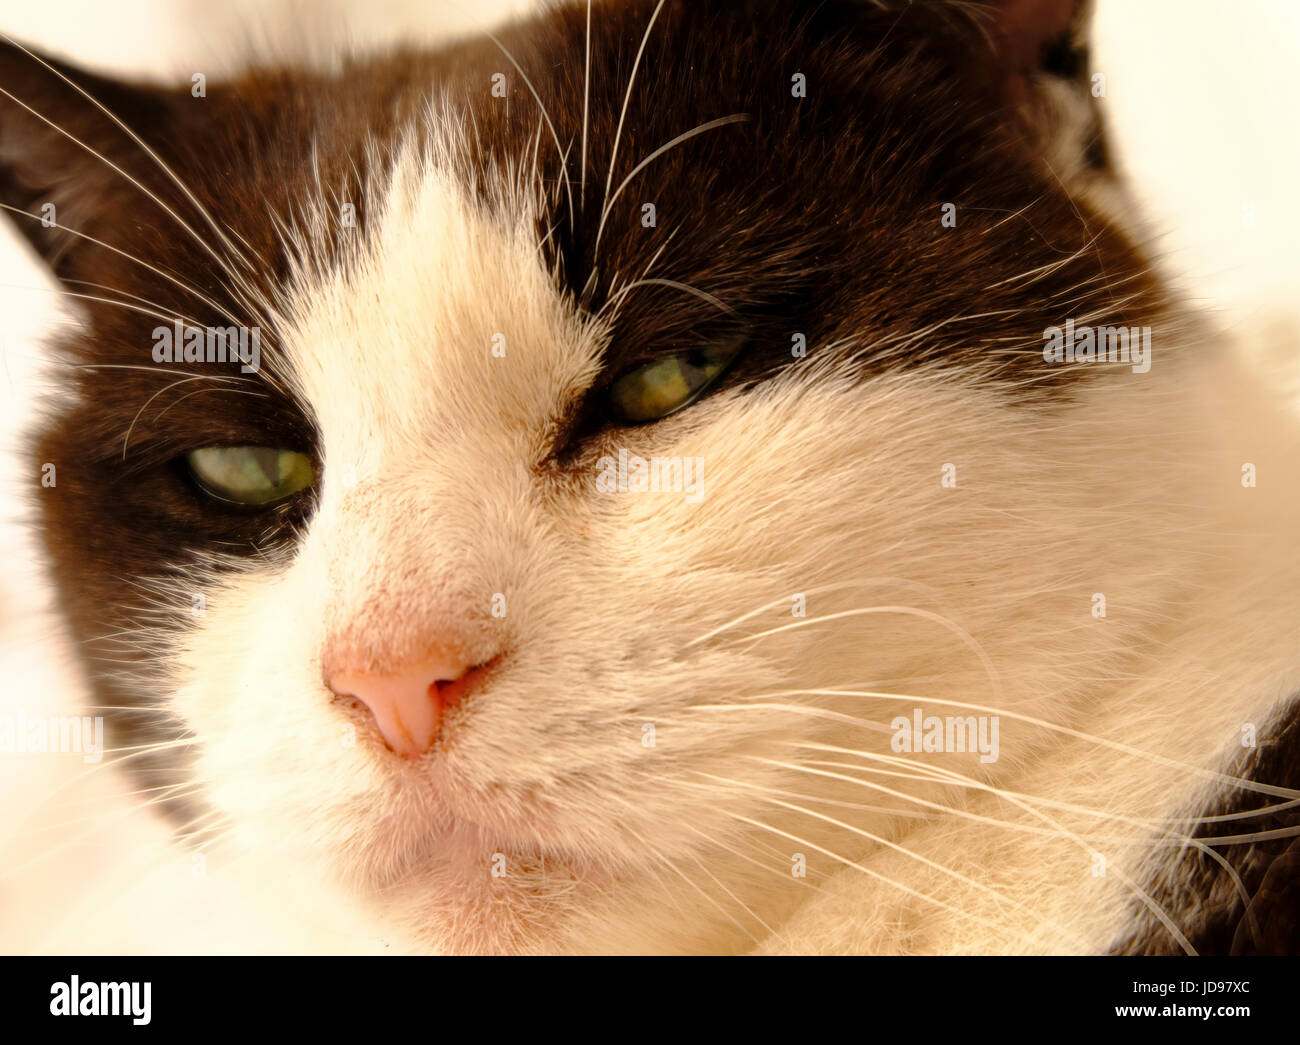 Close up of black and white cat (Felis catus) with a dirty look expression on her face Stock Photo